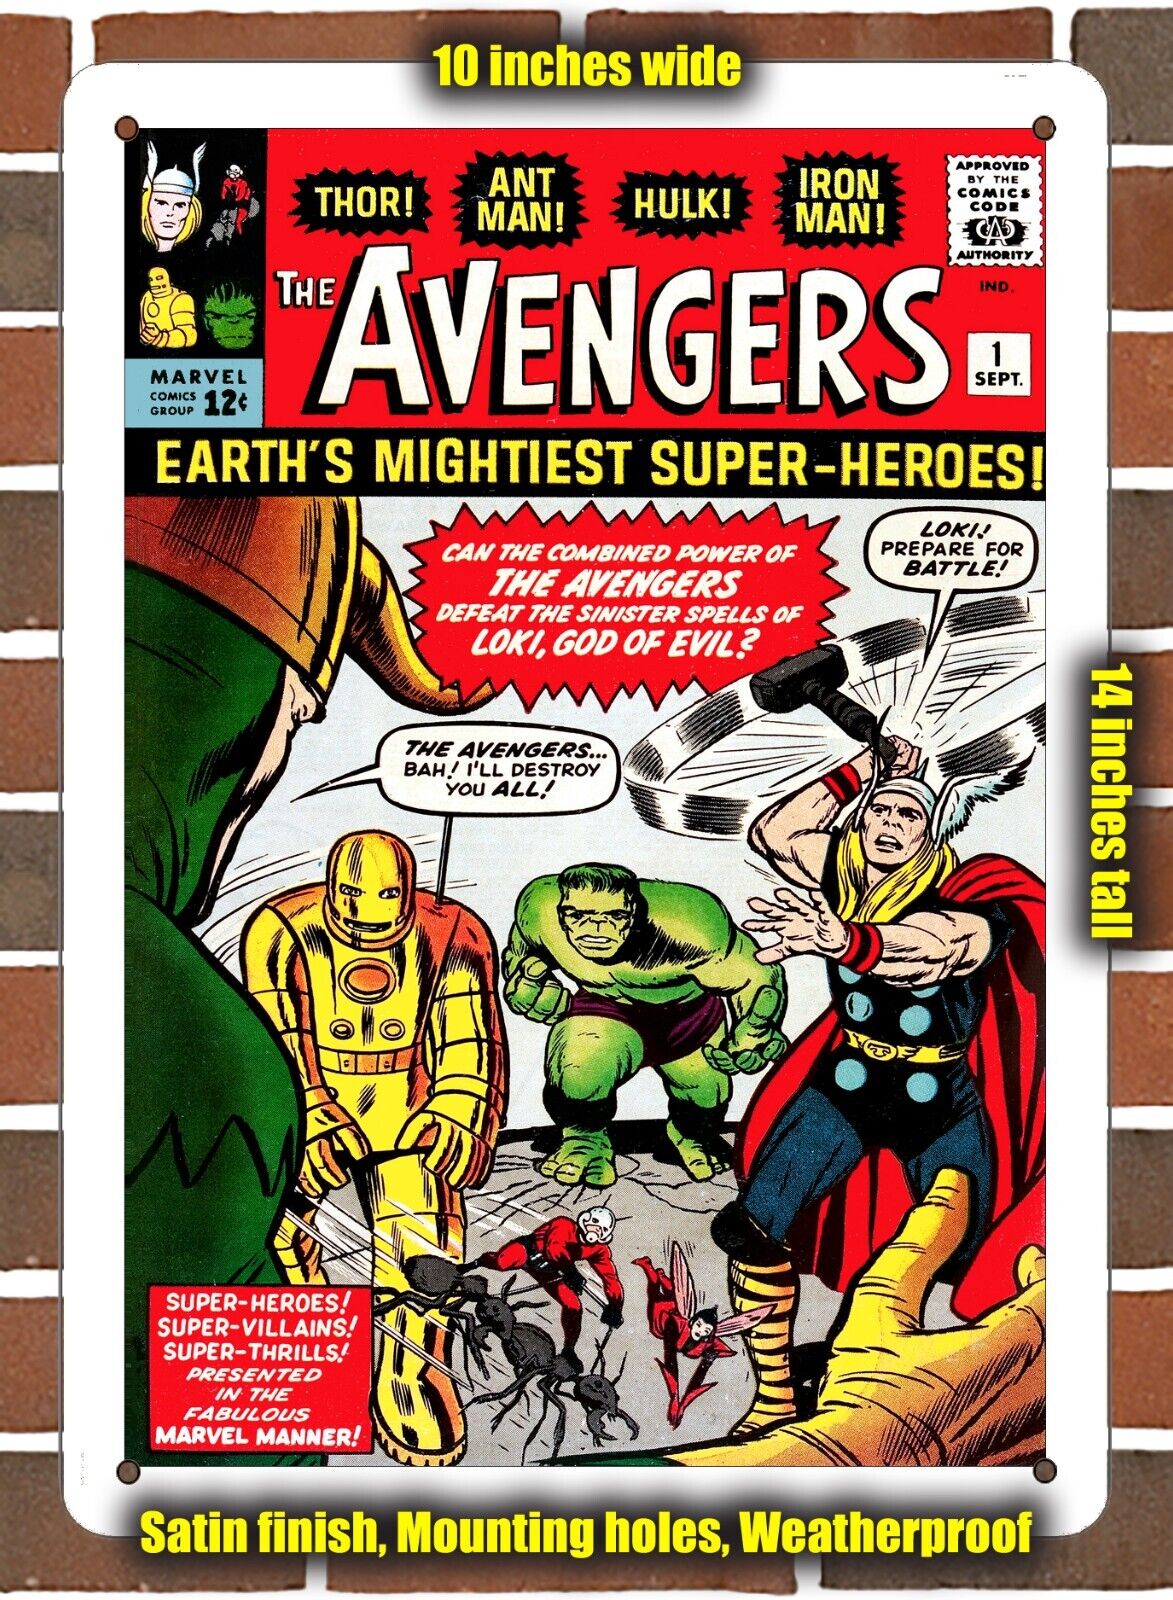 We'll Make You ANY Comic Book Cover as a 10x14 inch Metal Sign